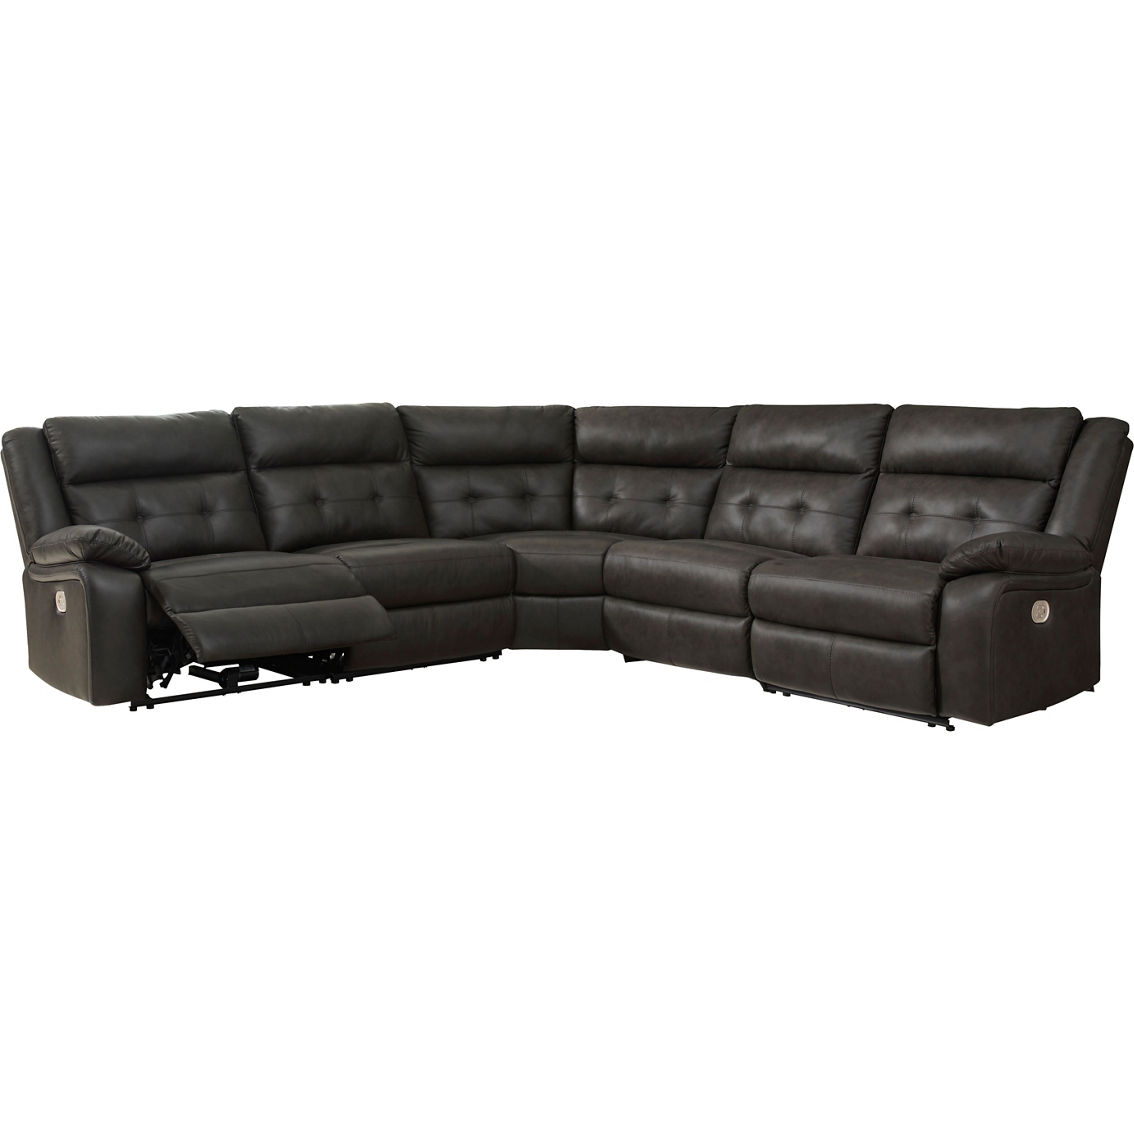 Leather+ by Ashley Mackie Pike 5 pc. Power Reclining Sectional - Image 5 of 10